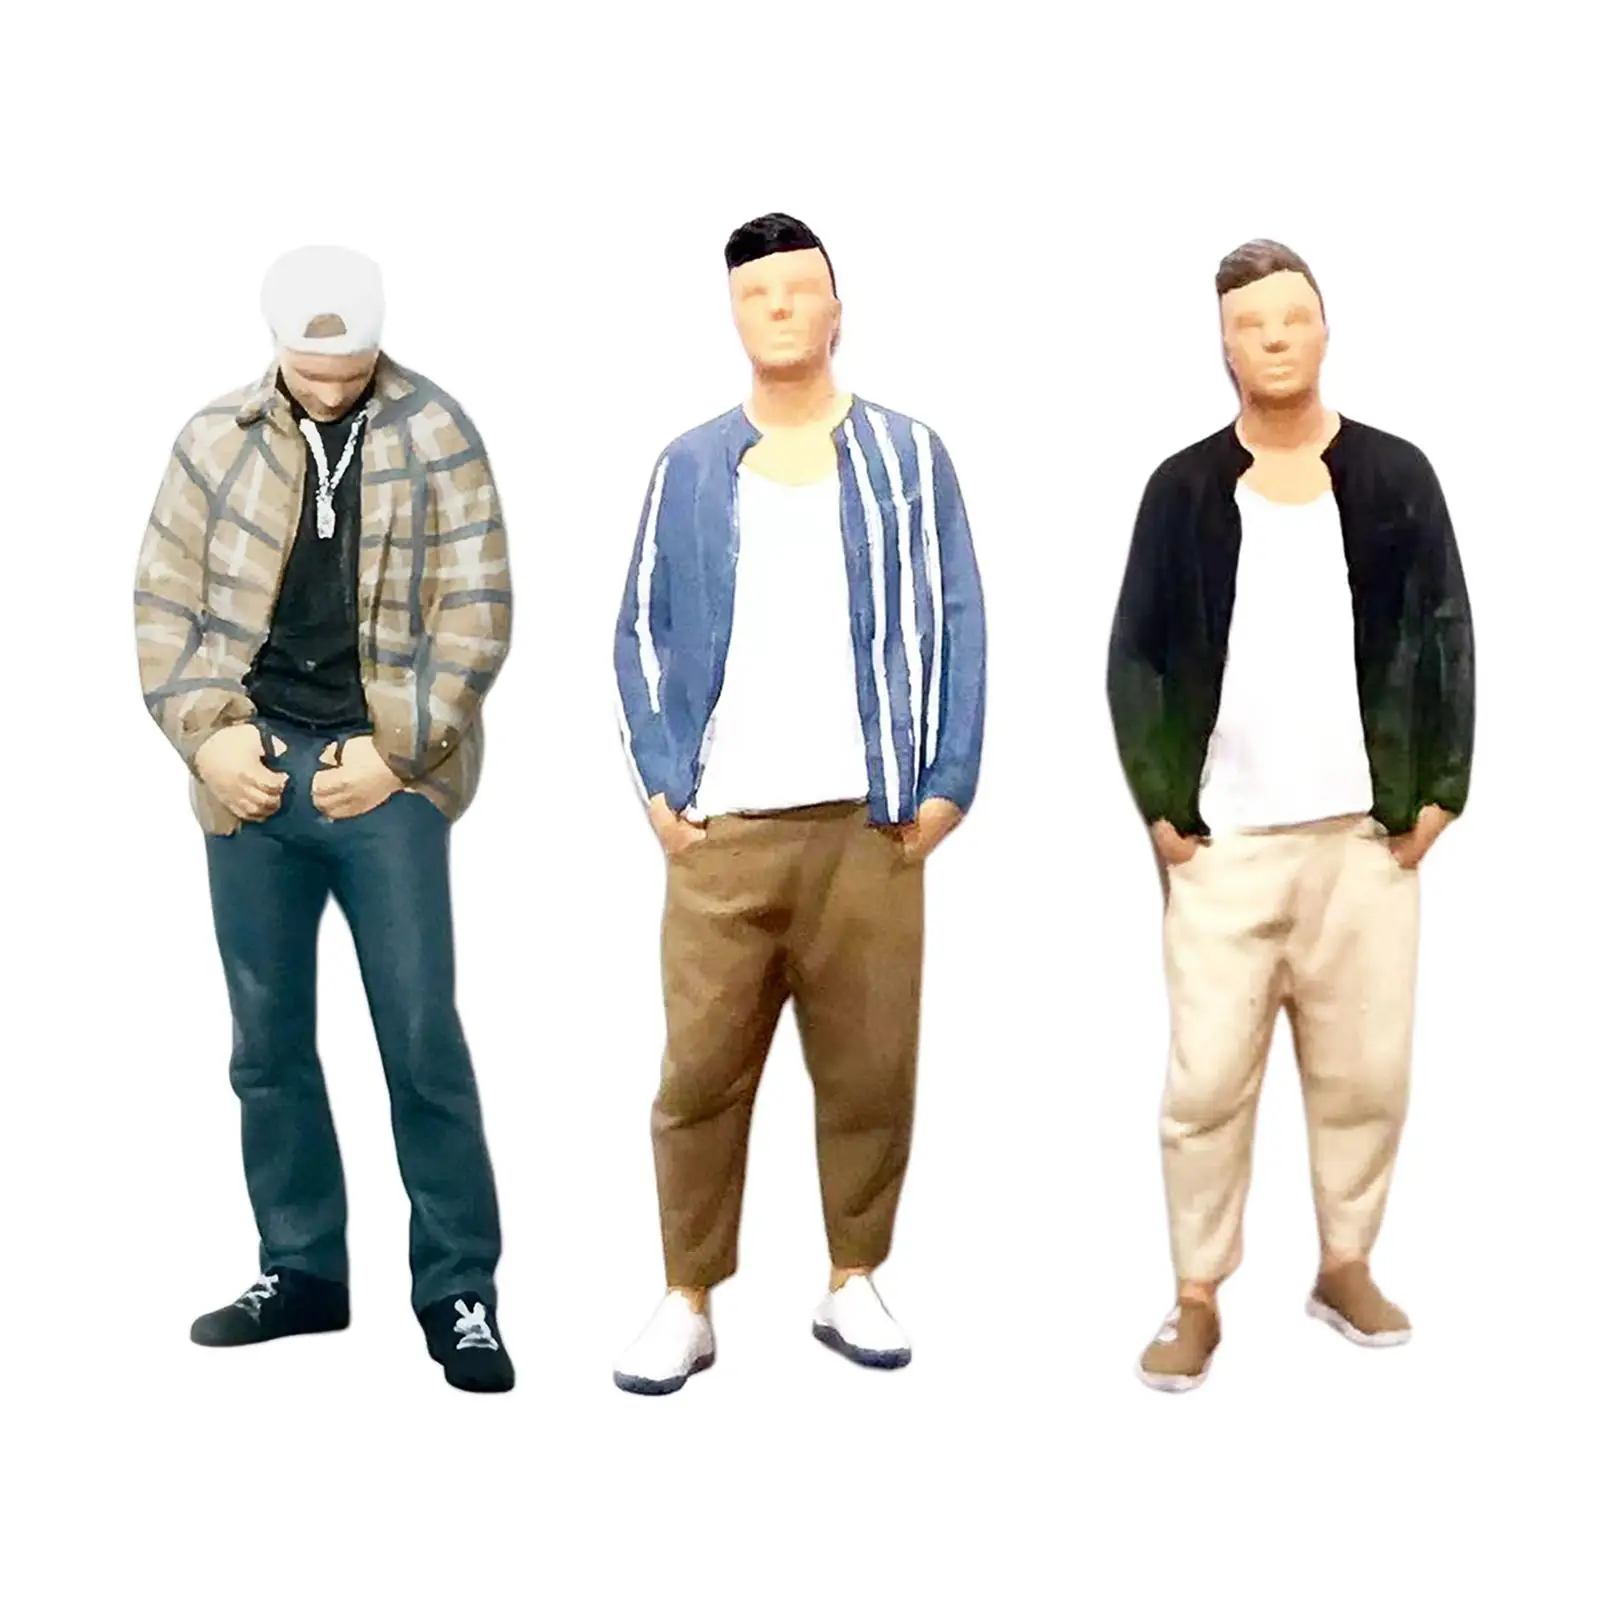 1:64 Figure People Model Male Character Toys Colorful for Miniature Scenes